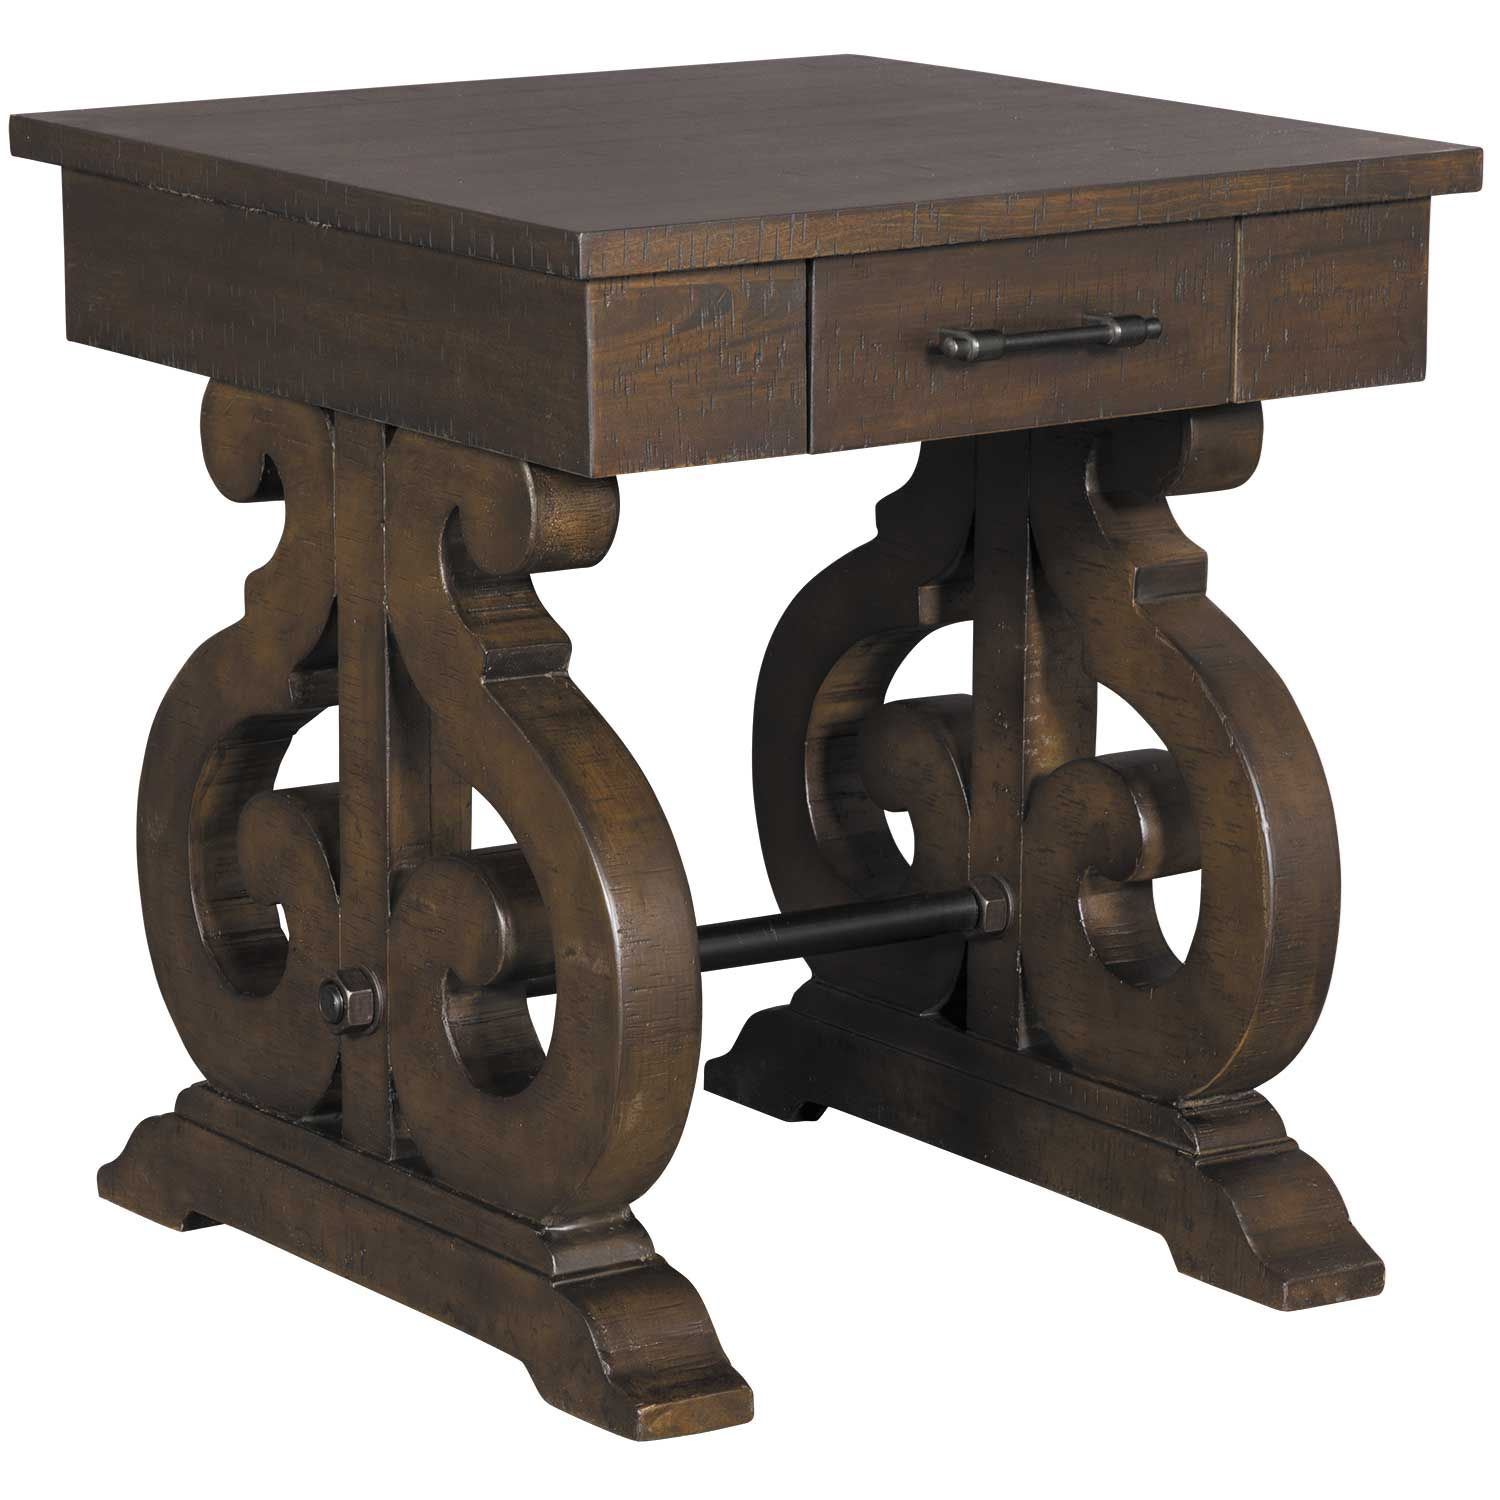 Stone Square End Table TST100ST | Elements International Group 